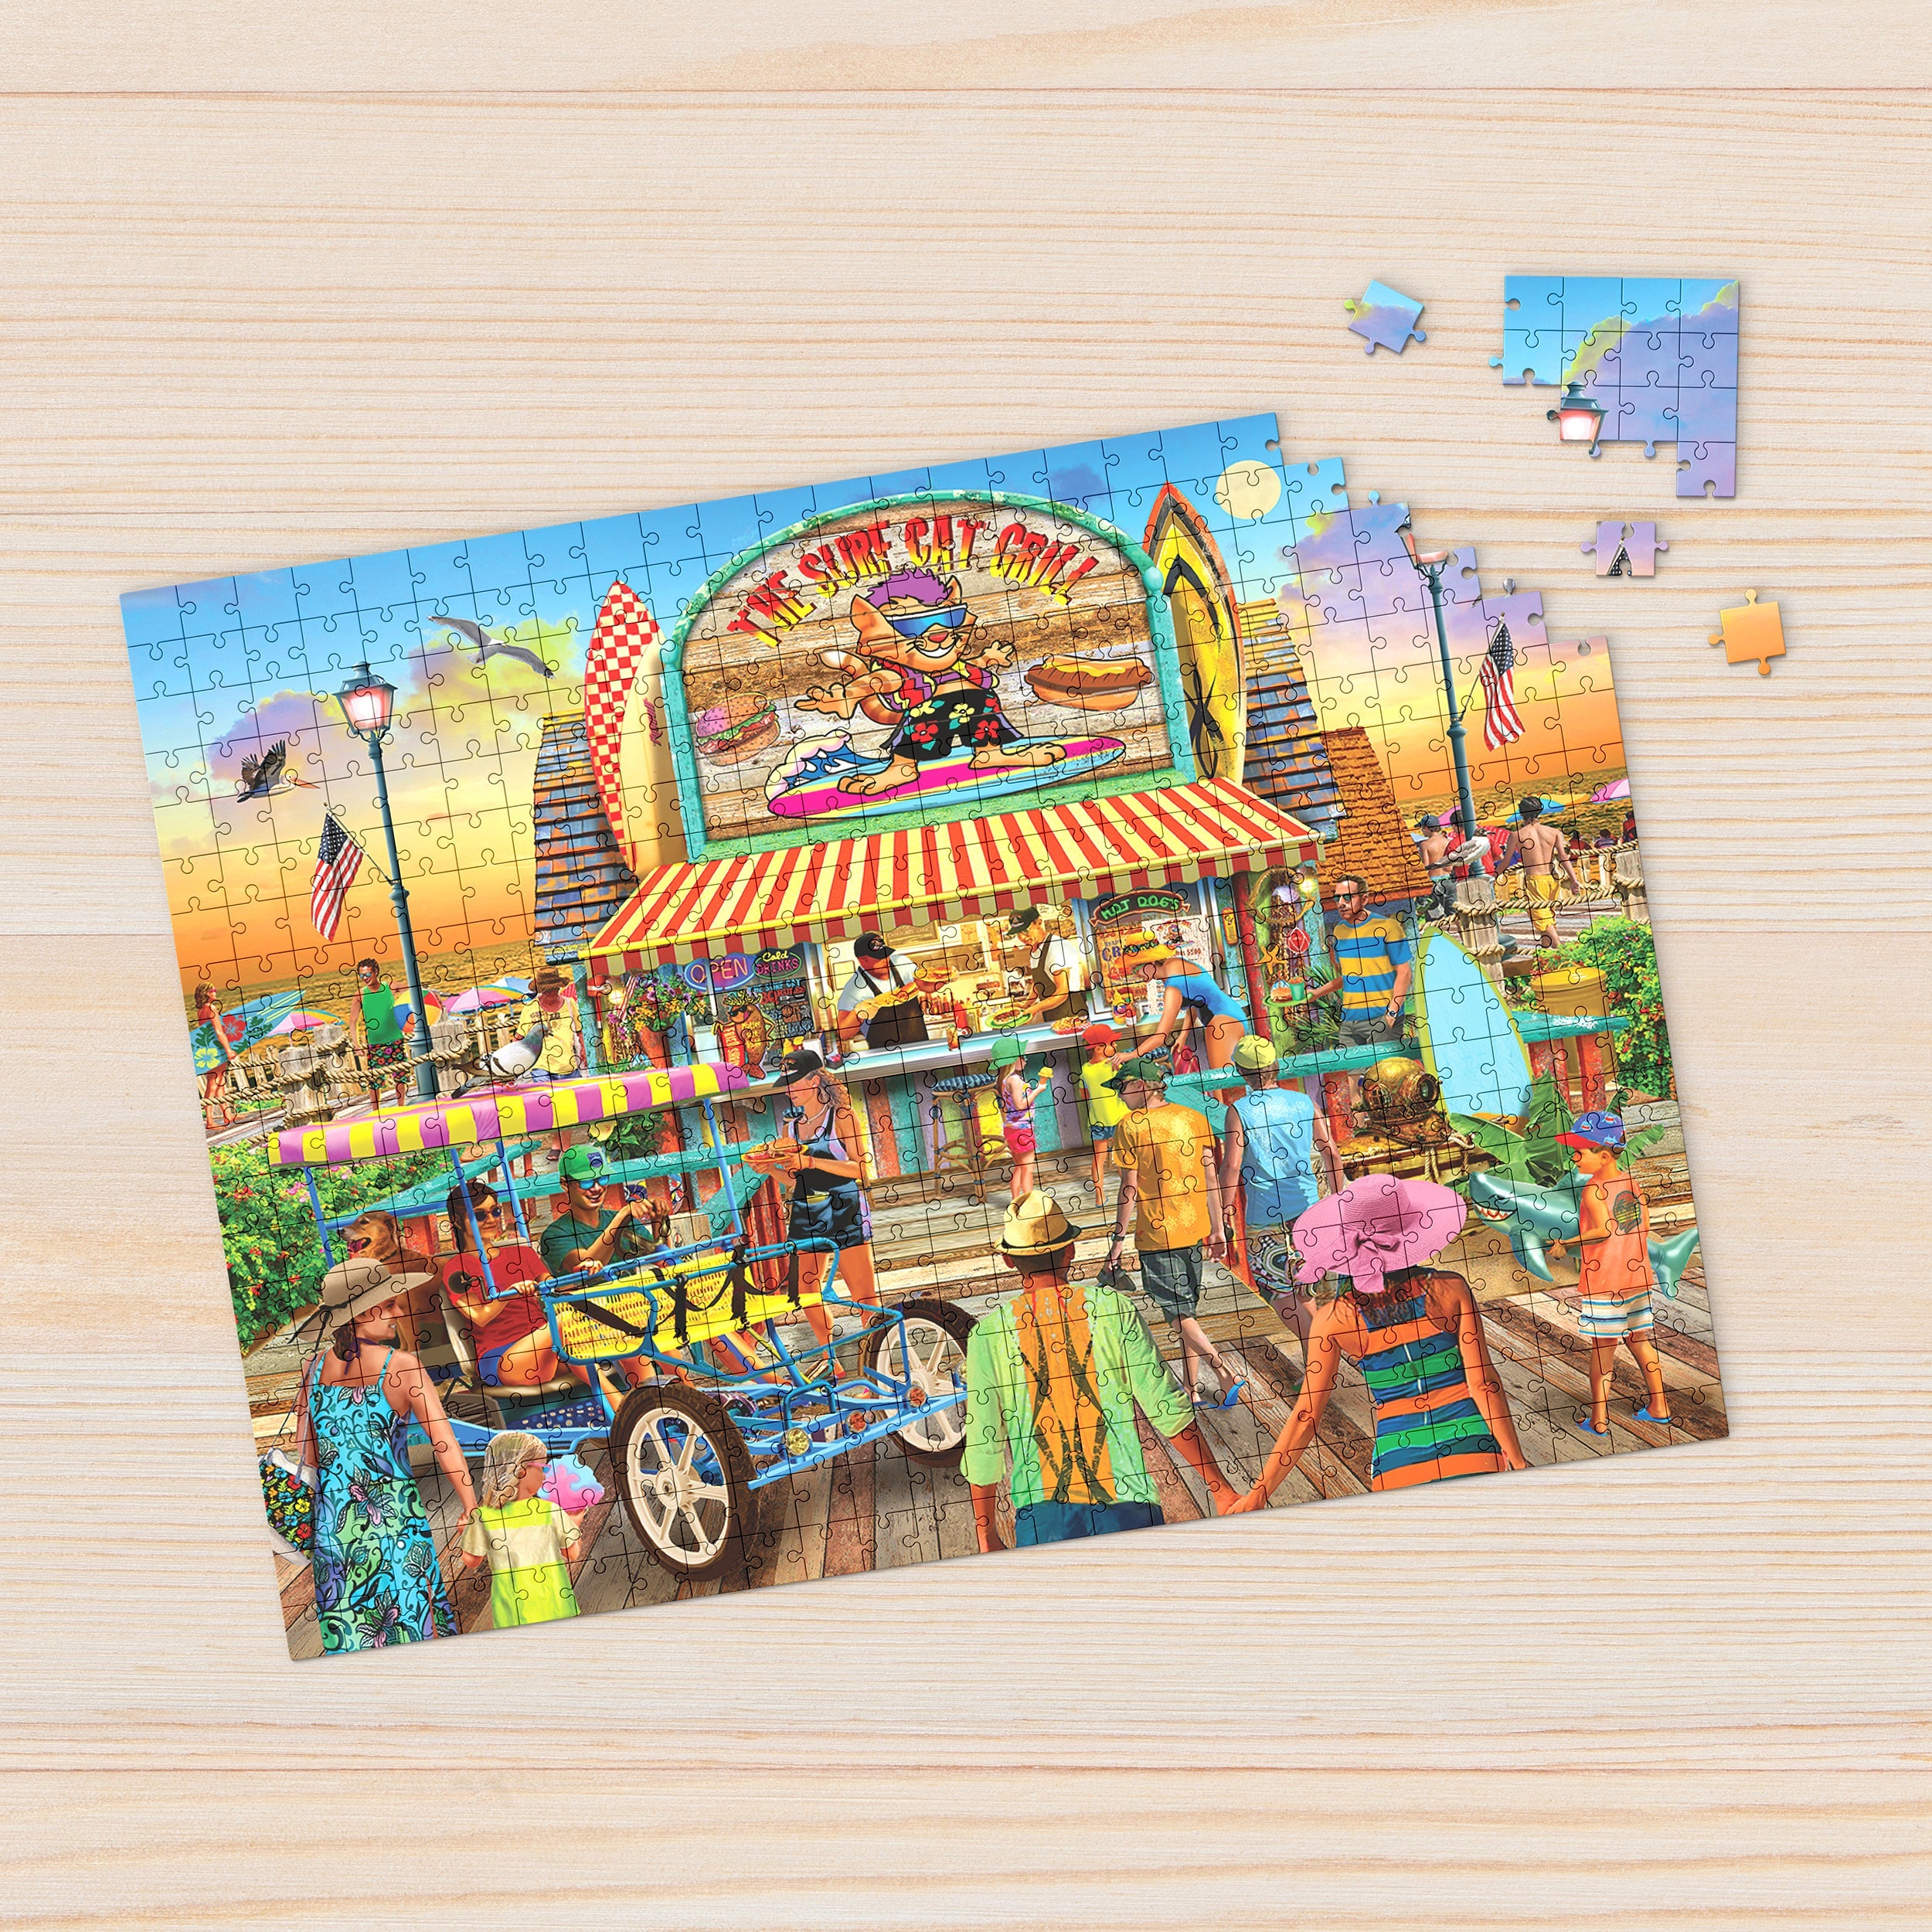 The Surf Cat Grill 1000 Piece - Jigsaw Puzzle